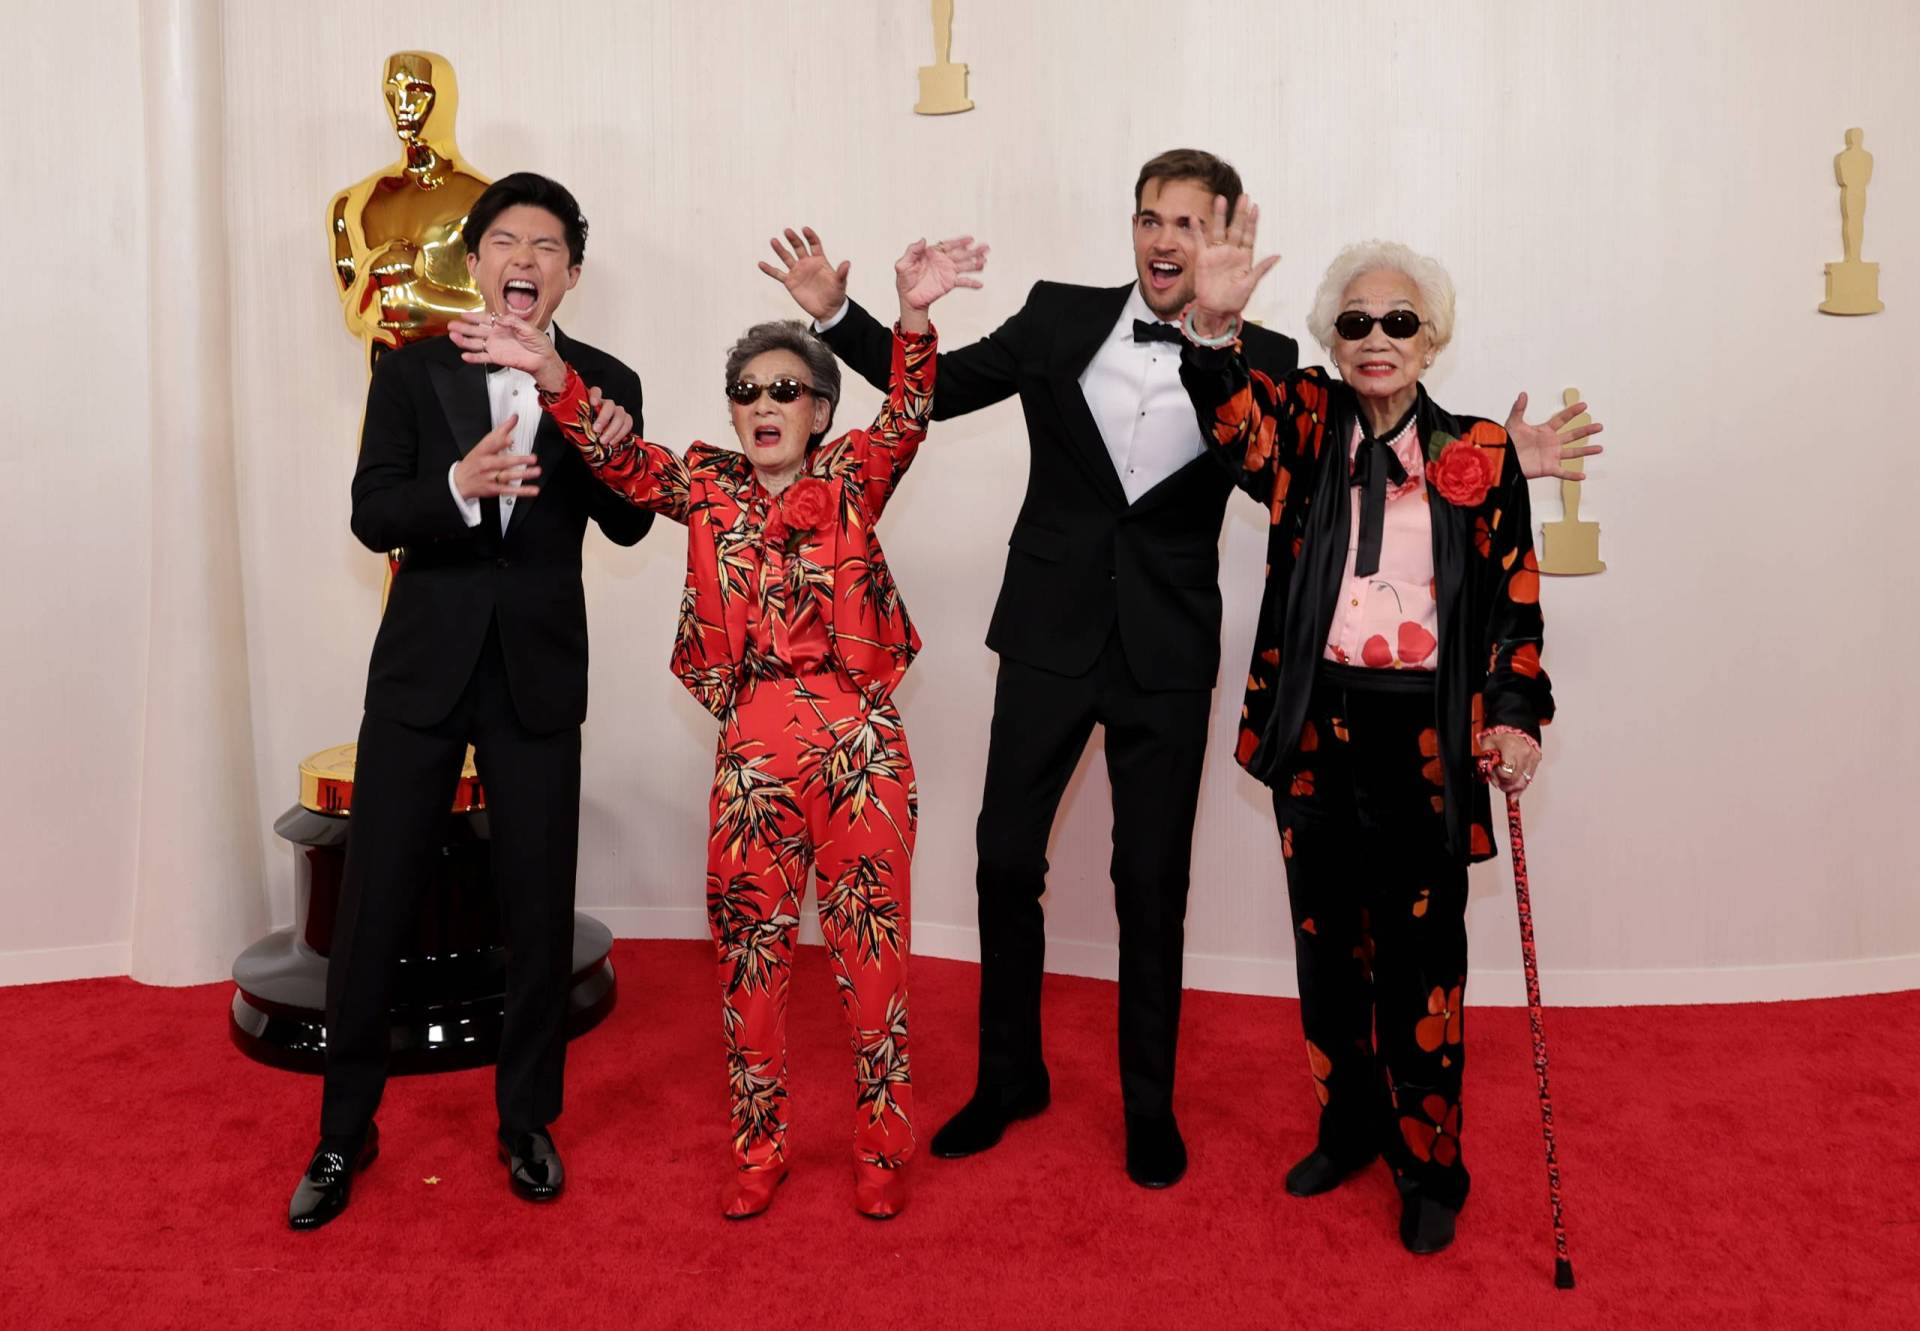 A white man and an Asian man, both wearing tuxedos gesture wildly next to two elderly Asian women, both wearing dark sunglasses and flamboyant suits.